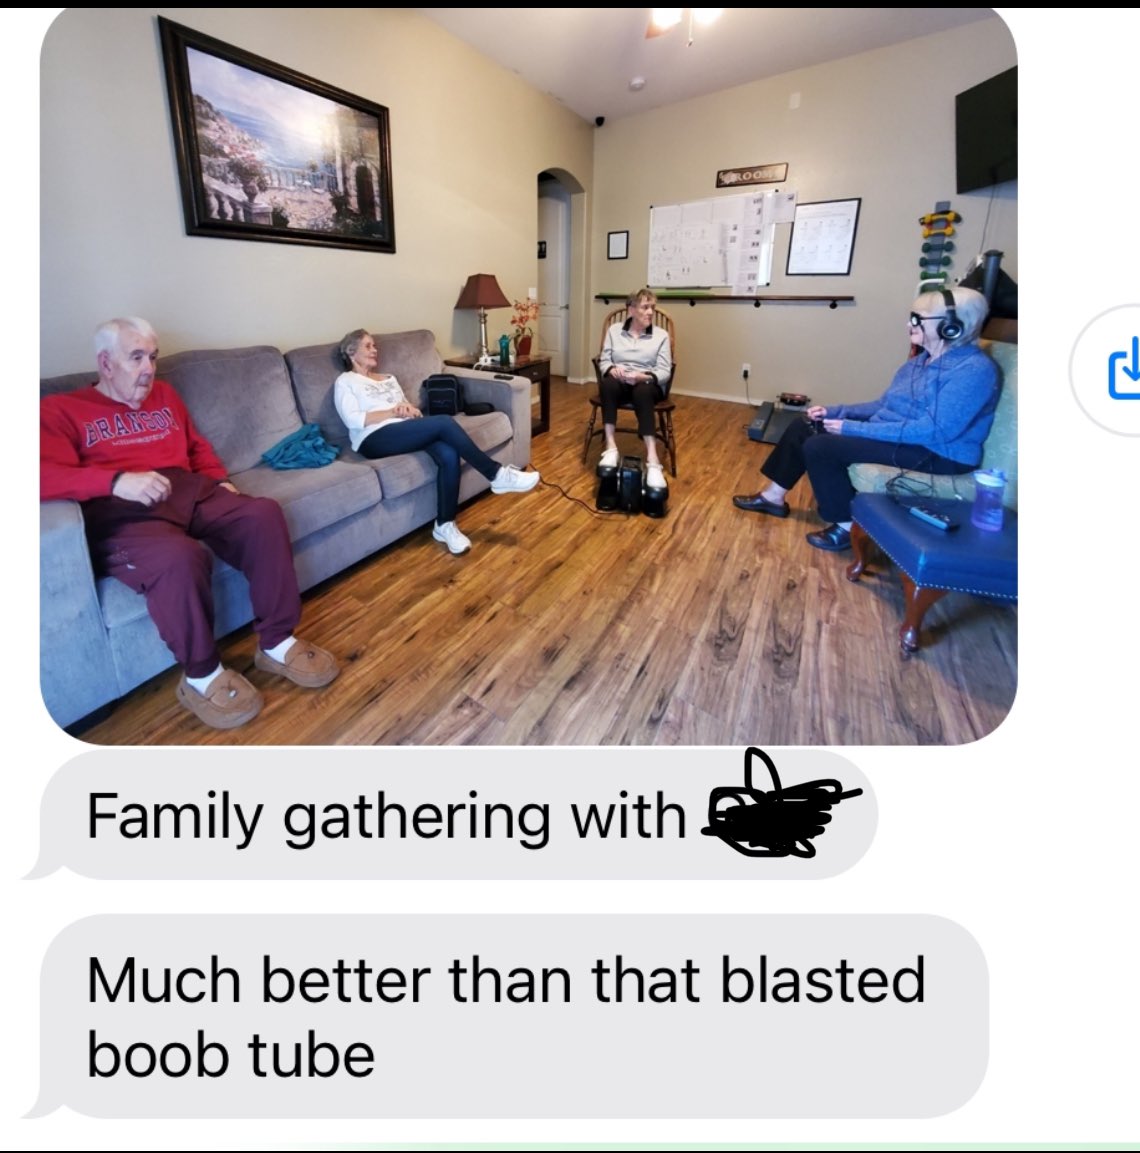 The wife of one of my residents just texted this to me.

It’s so great how our residents get along and help each other.

The headset is an audio visual entrainment device (#daviddelightpro) that helps the brain relax and promotes healing.